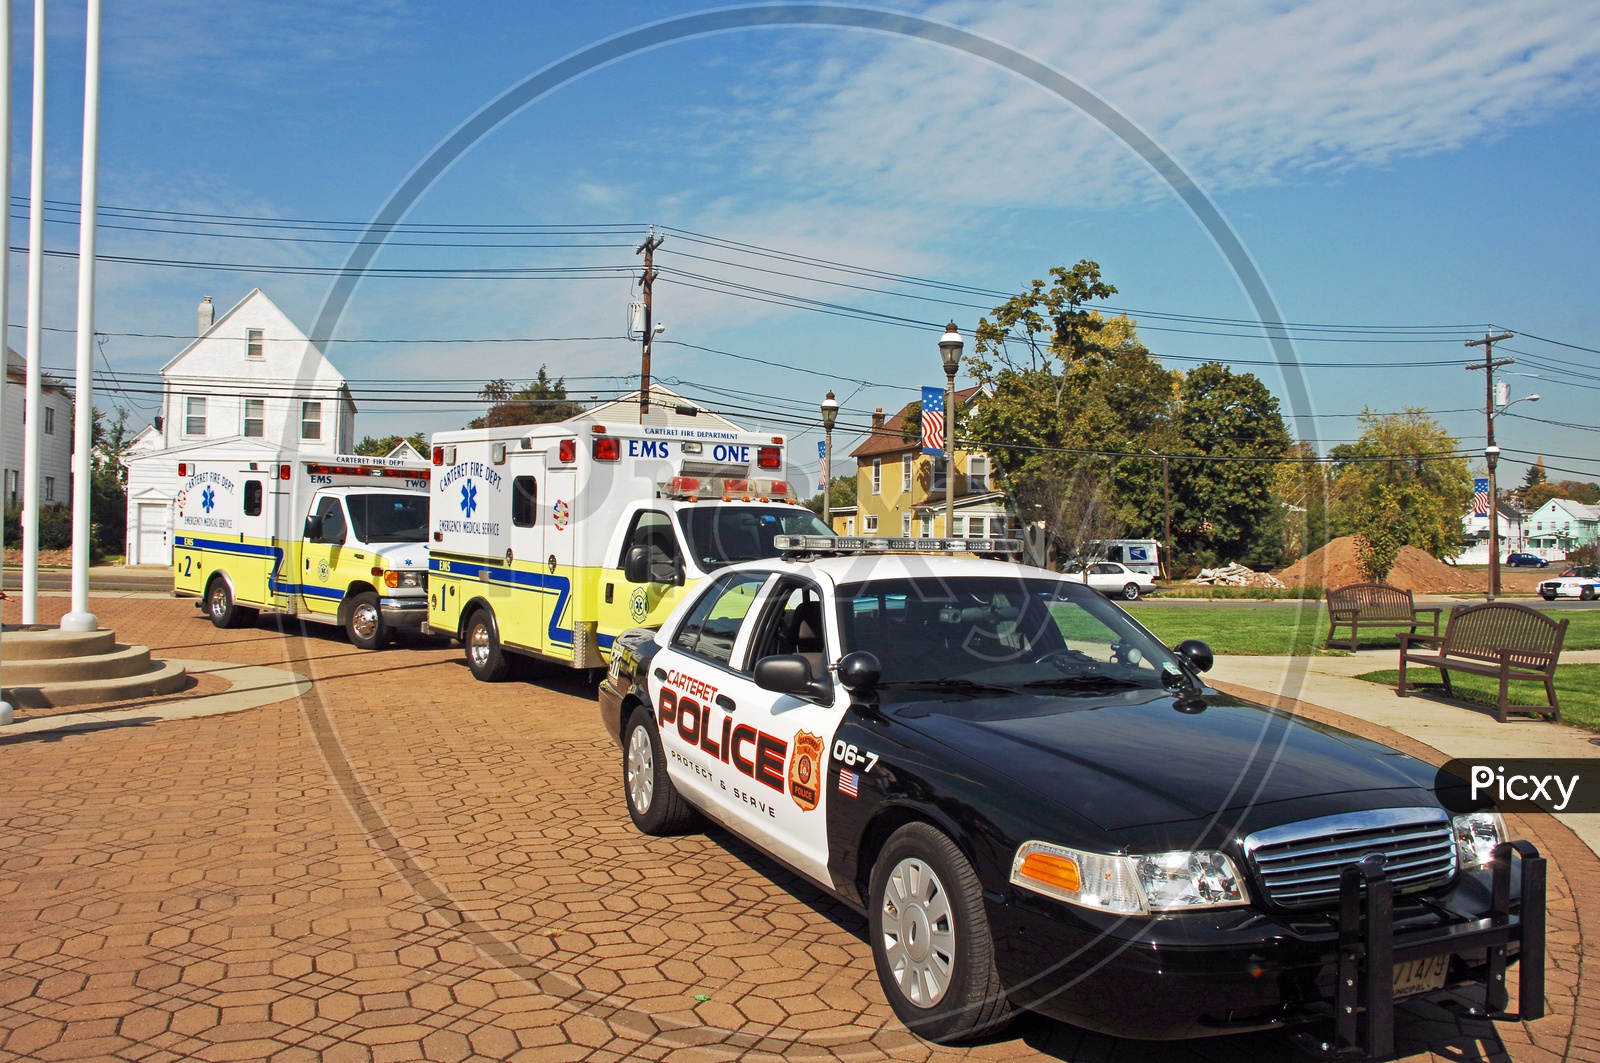 Carteret police car and fire department vehicles